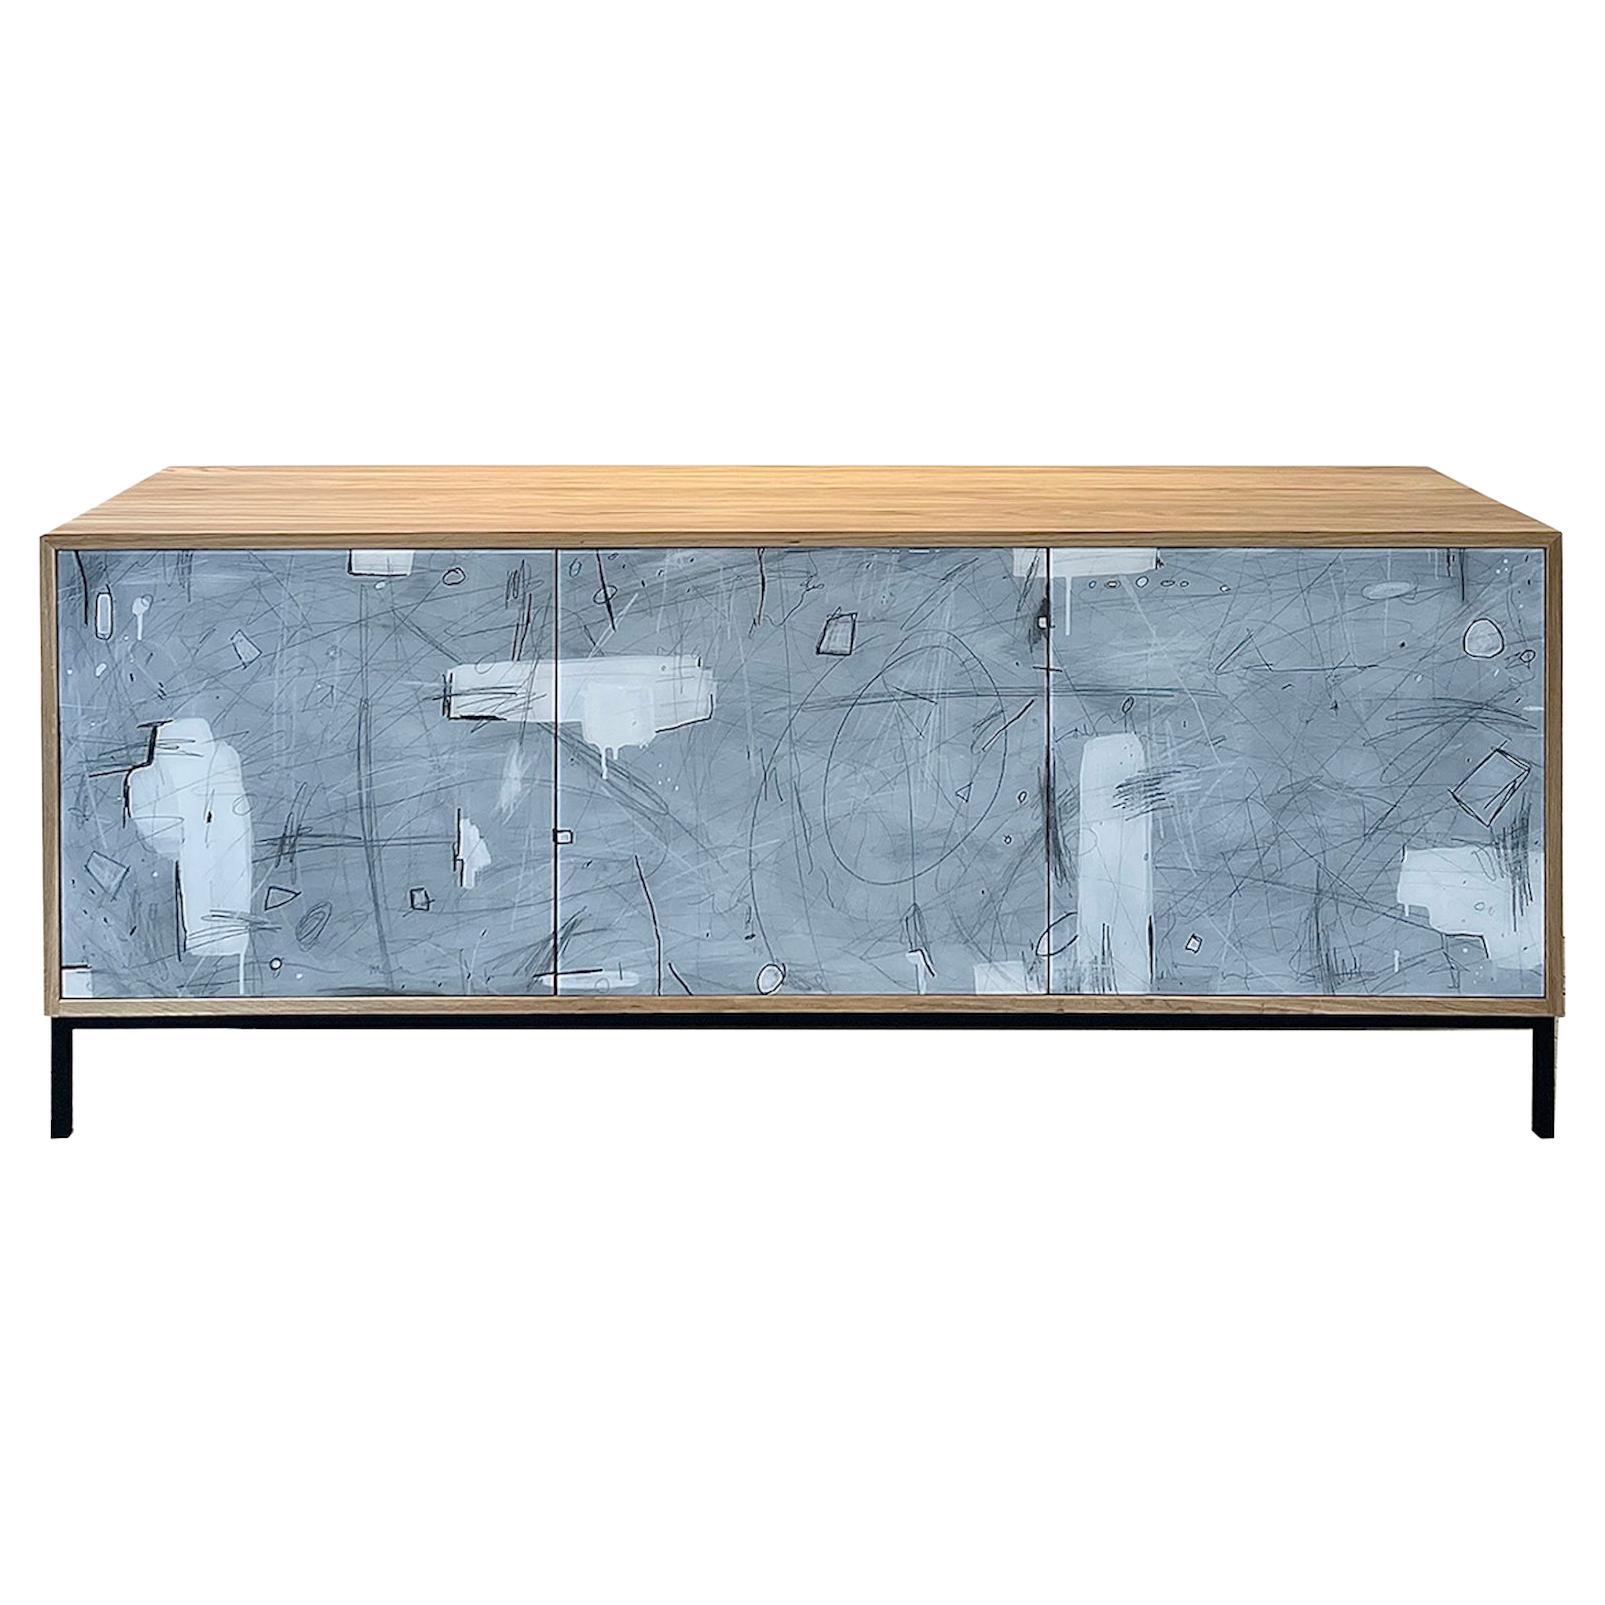 Abstract in White credenza by Morgan Clayhall, mix media artwork on doors For Sale